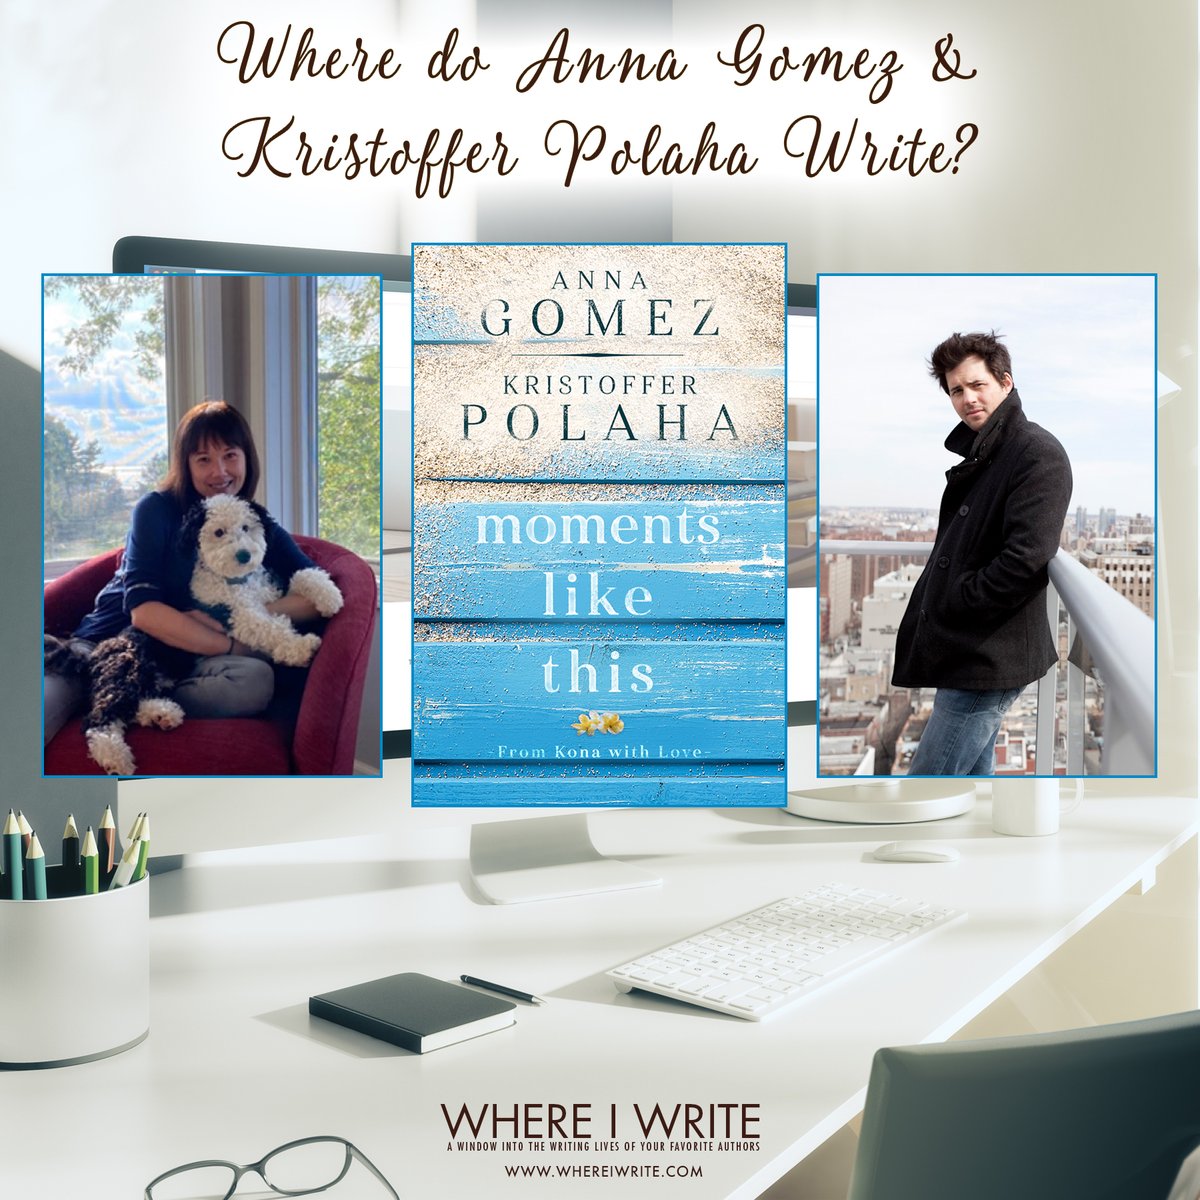 Check out this NEW #BookFeature a new release not to miss!
We are so excited that @whereiwritesite is featuring Authors @AnnaGomezbooks @KrisPolaha
📝  whereiwrite.com 
#AnnaGomez #KristofferPolaha #WhereIWrite 
#MomentsLikeThisBook #TheNextStepPR